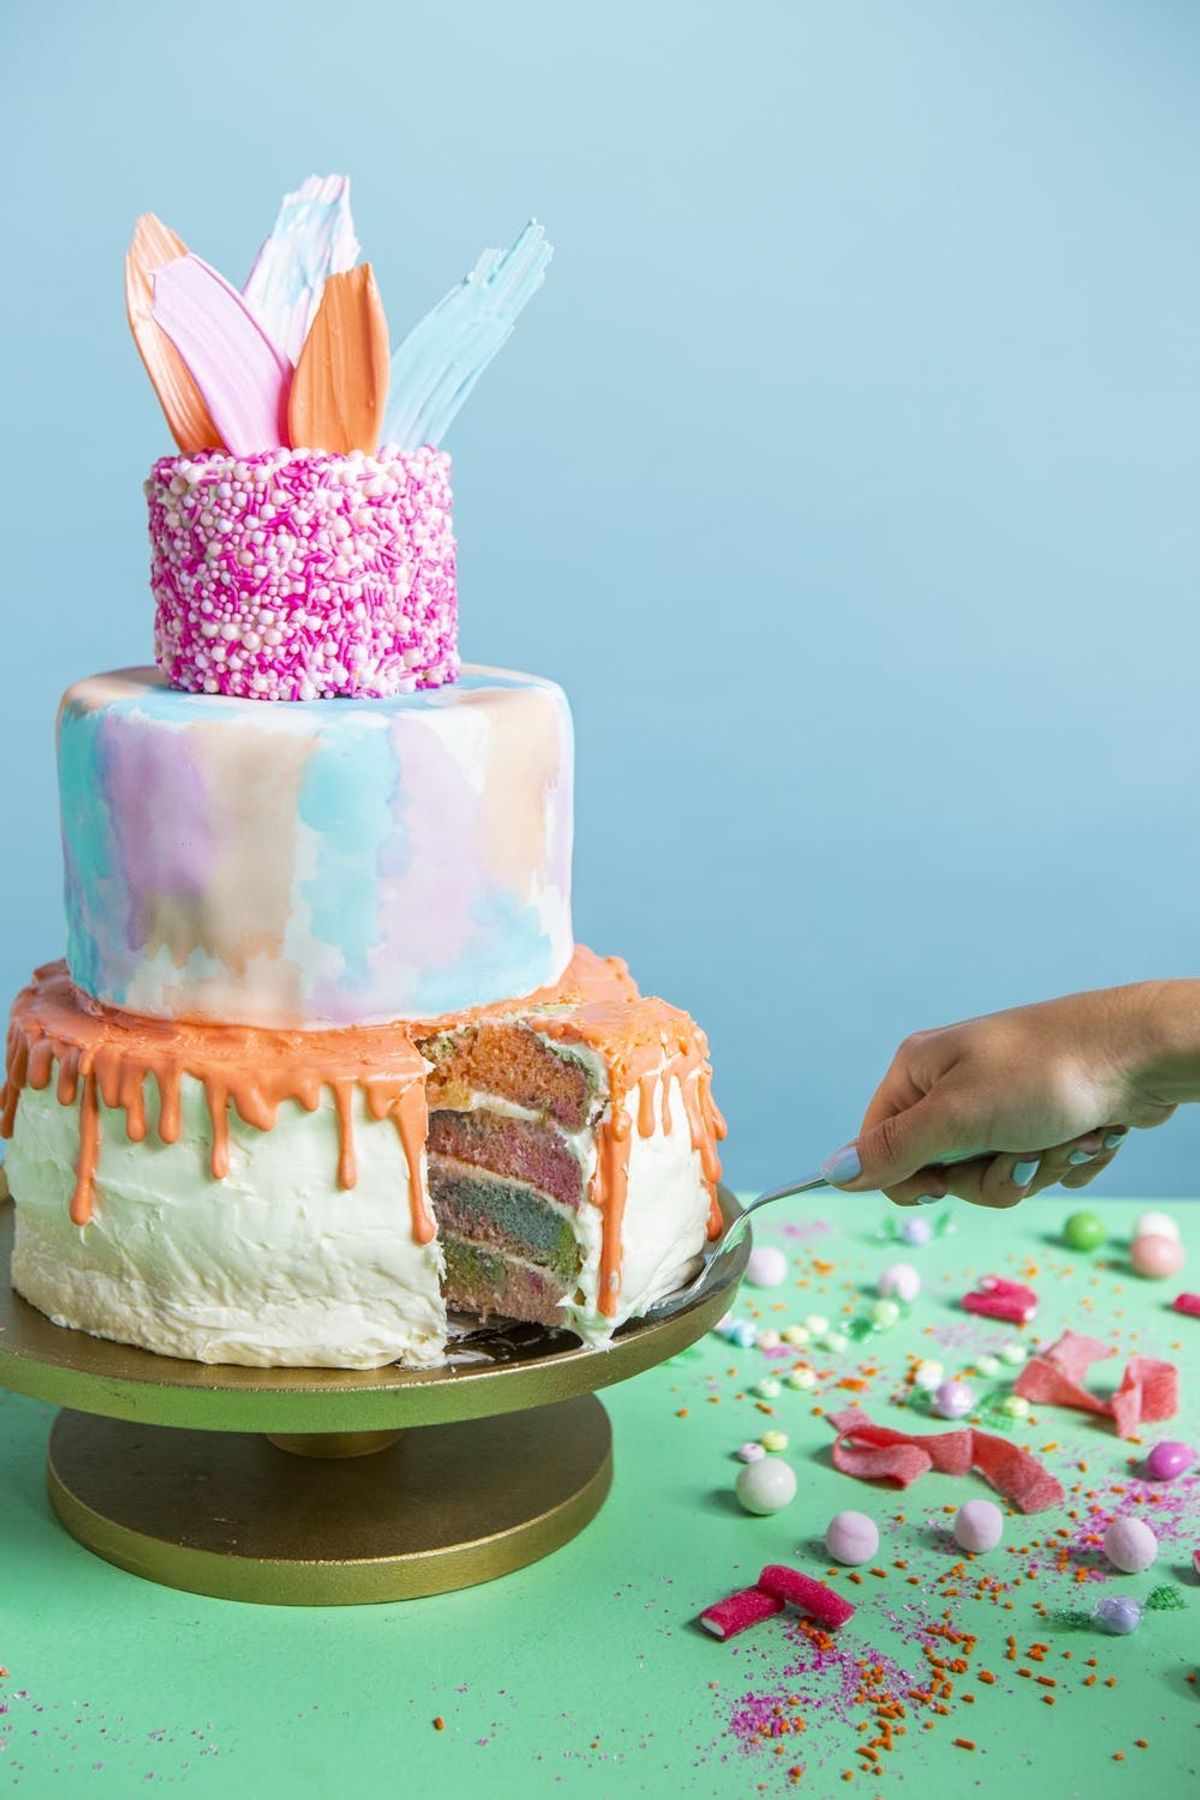 Check Out These Baking Hacks for Making a Showstopping Cake